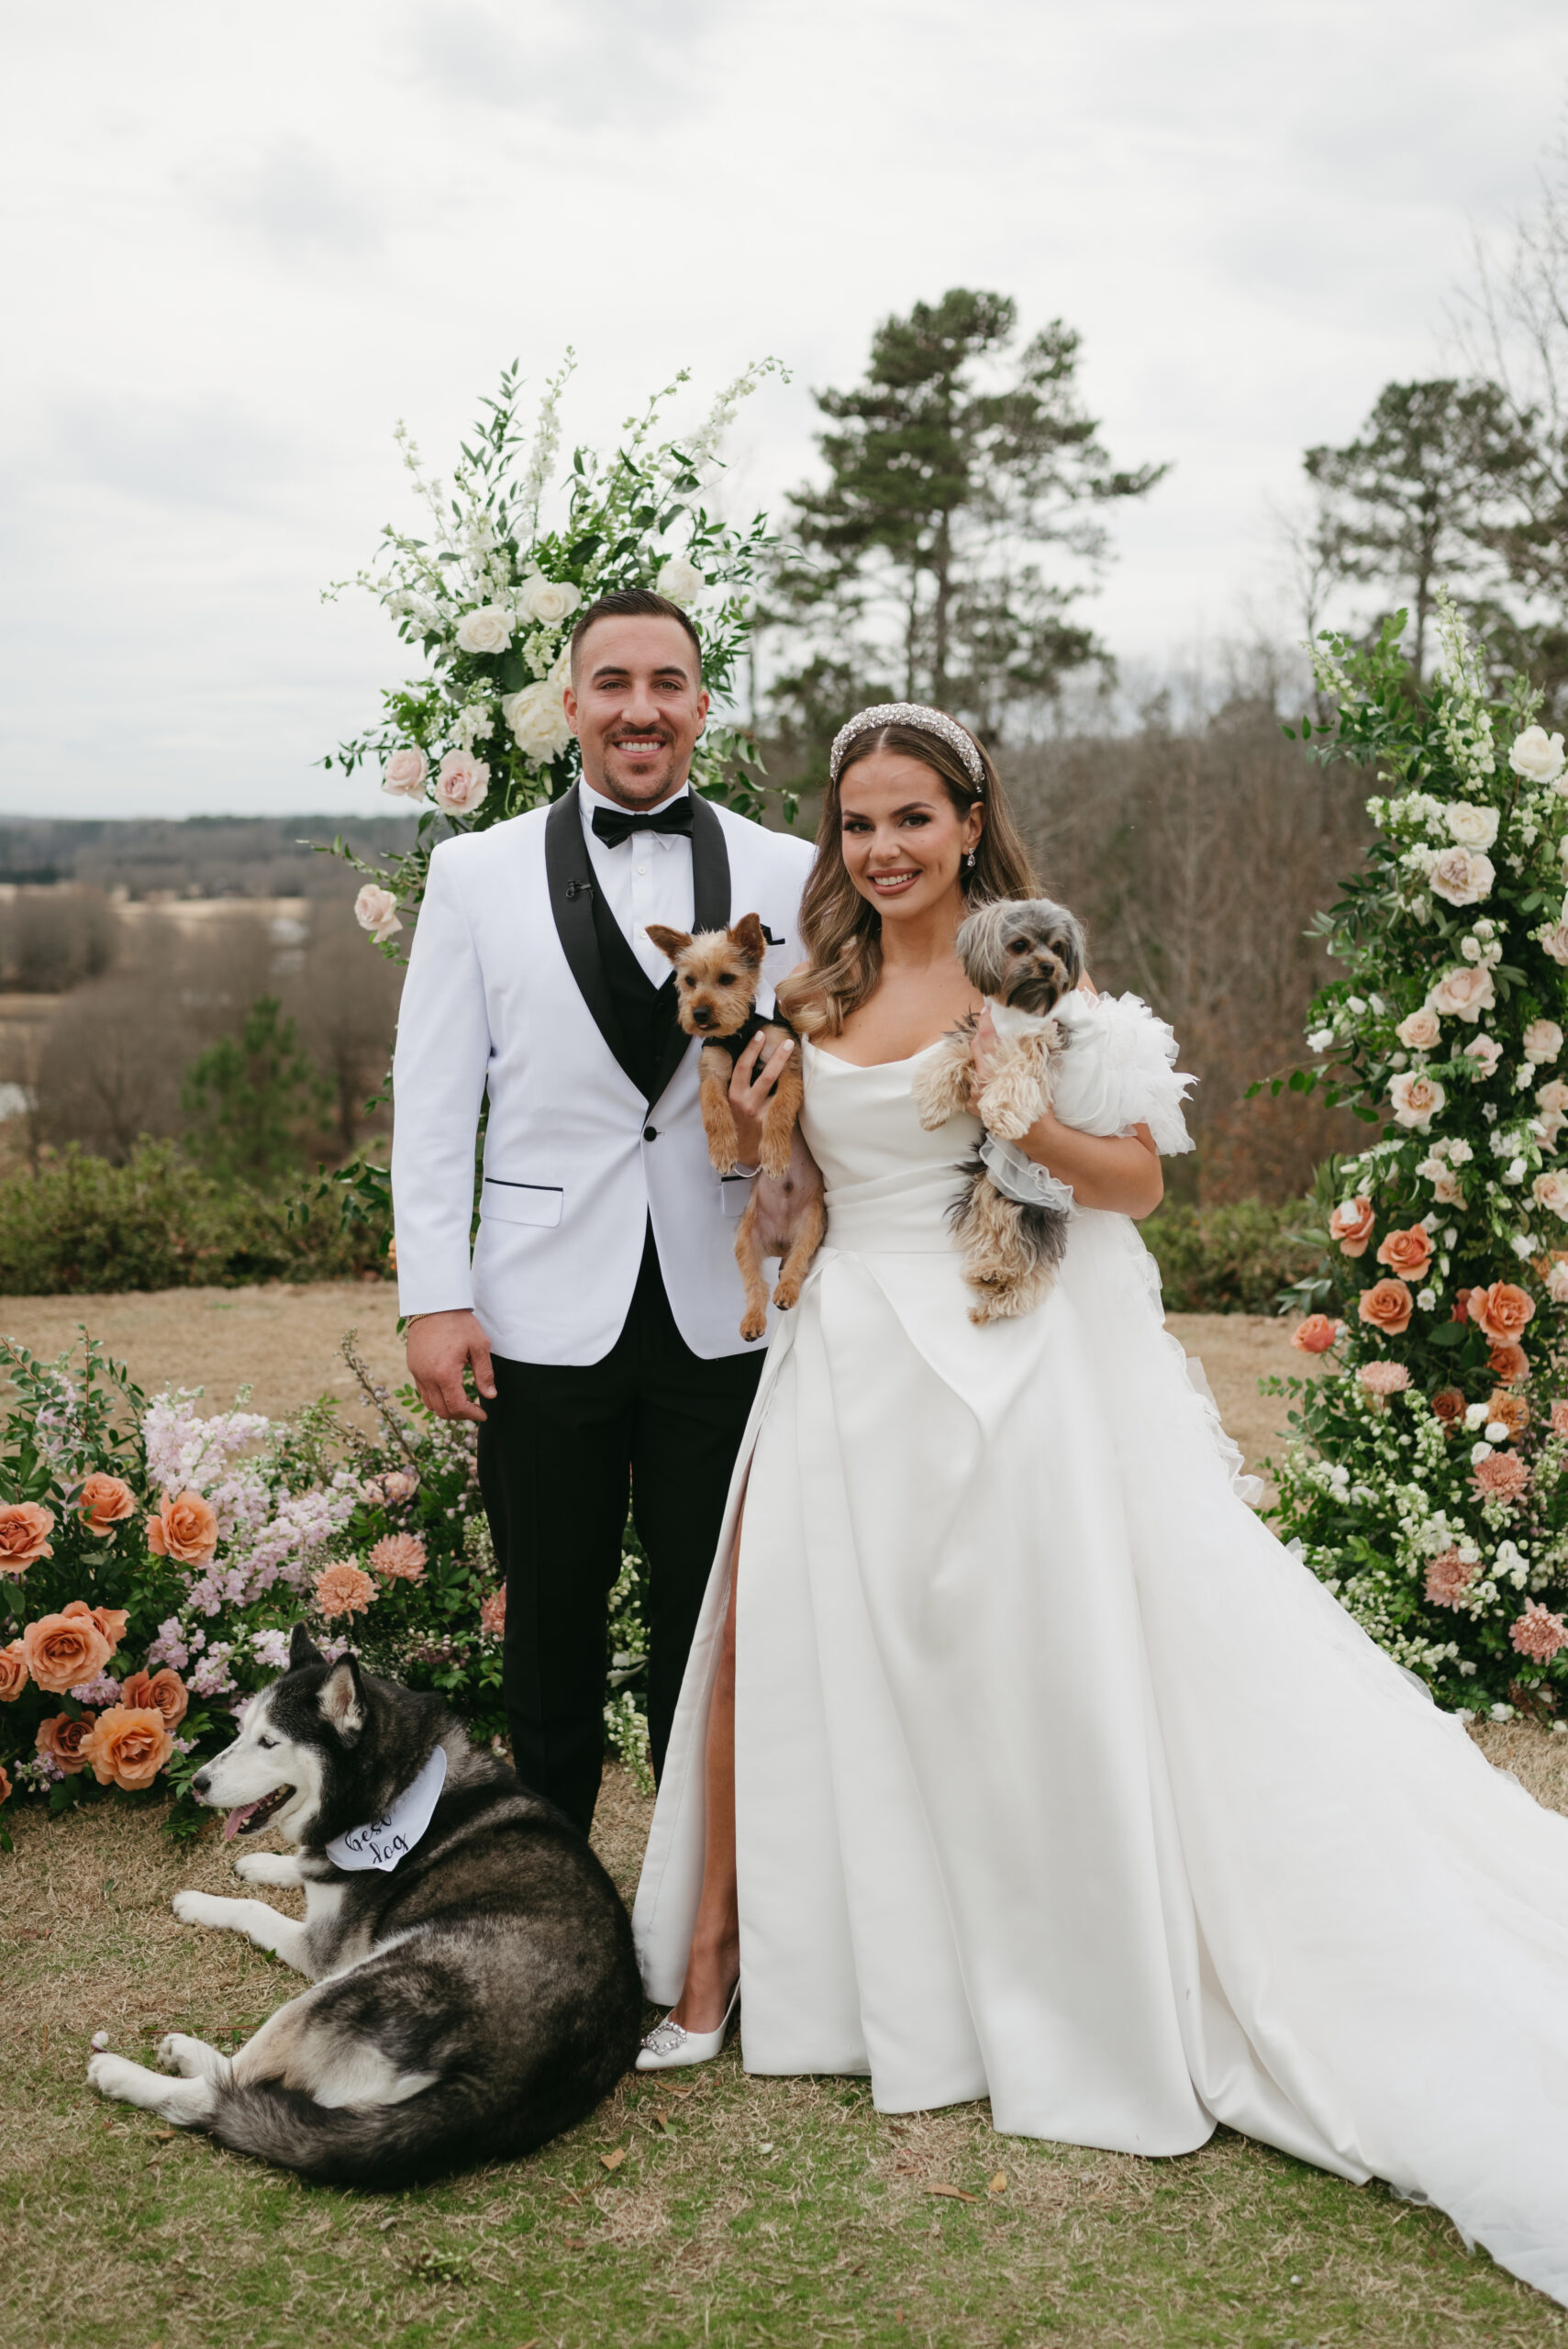 Modern wedding portraits with a bride with a bridal headband and groom with a white suit and their dogs in front of their colorful floral arch. | Megan Kuhn Photography